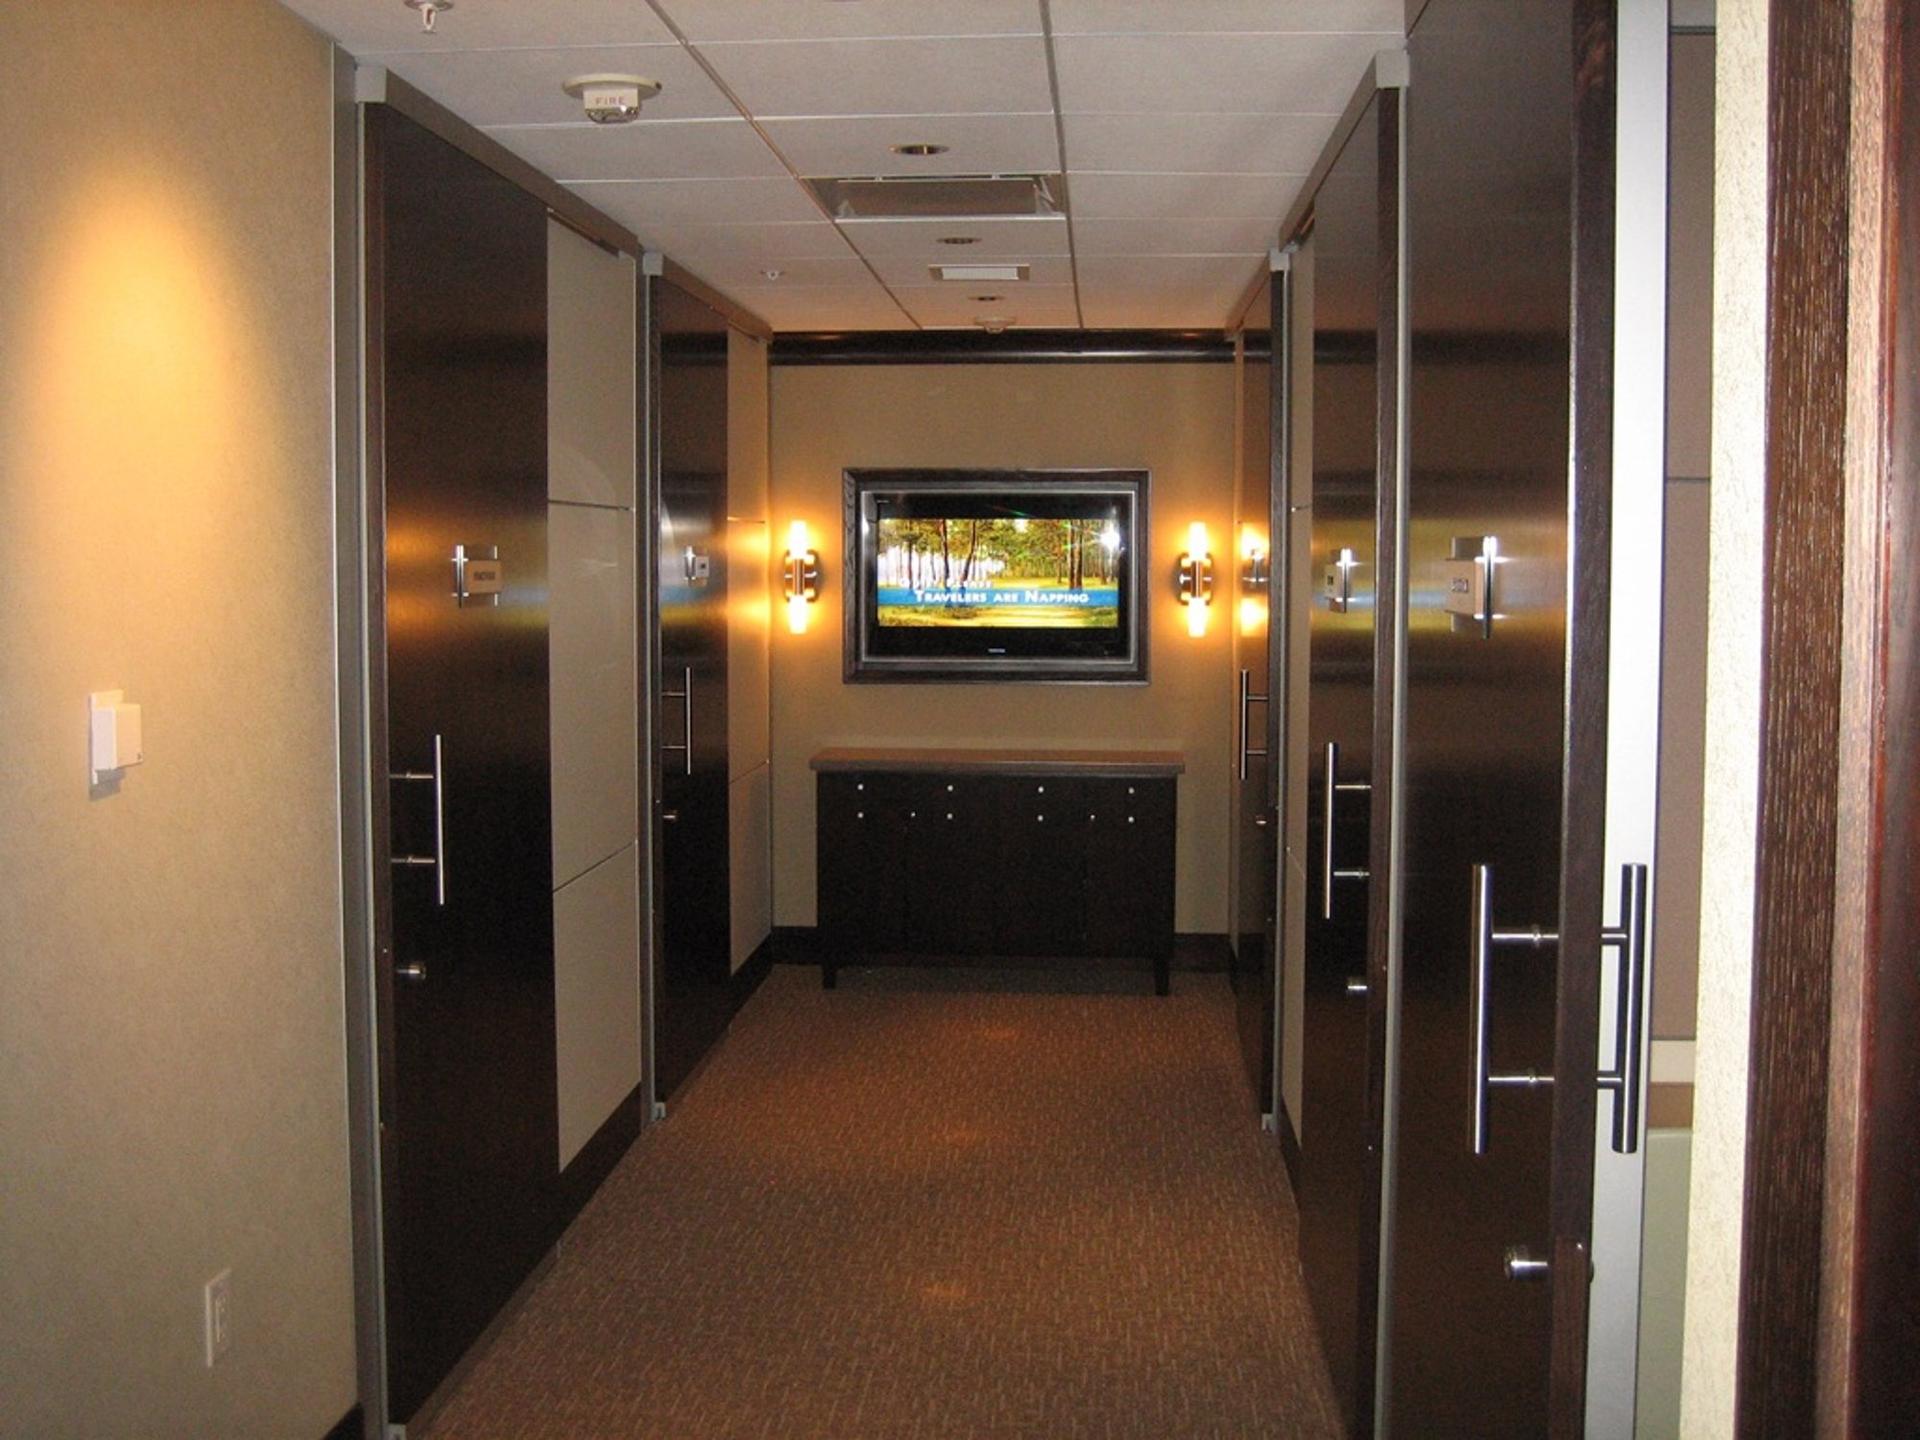 Minute Suites (Gate B15) image 8 of 19